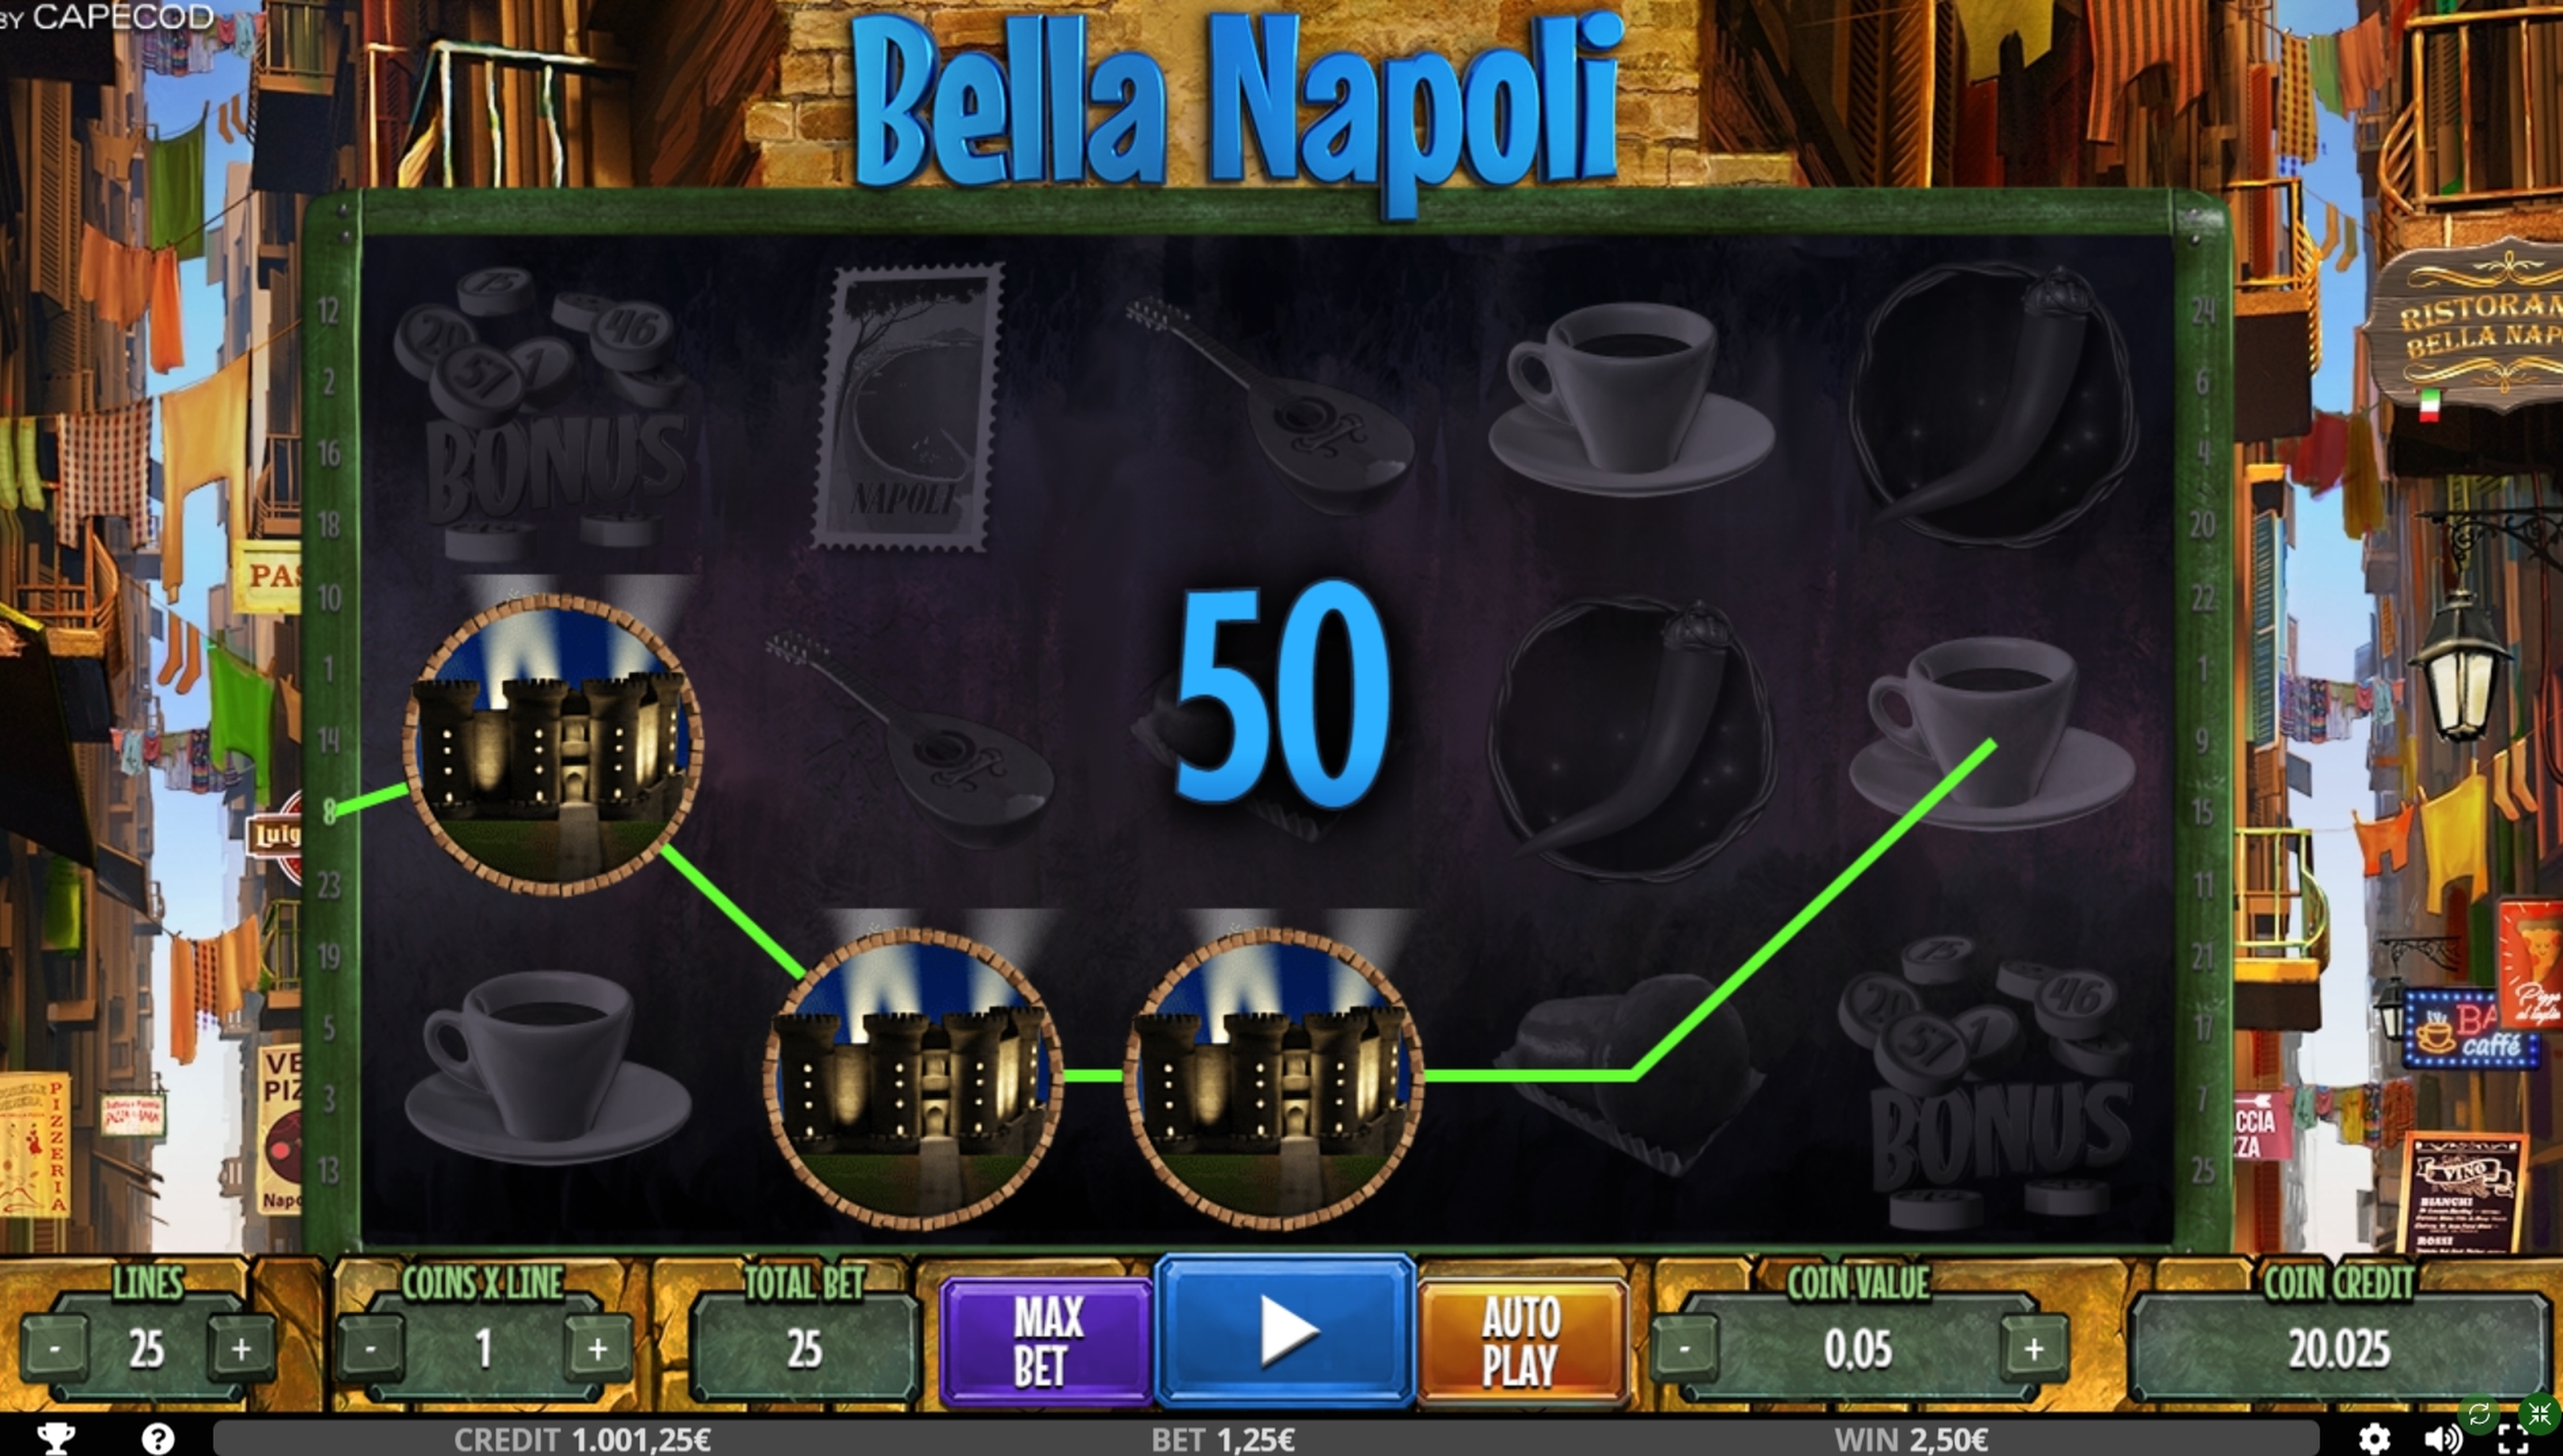 Win Money in Bella Napoli Free Slot Game by Capecod Gaming